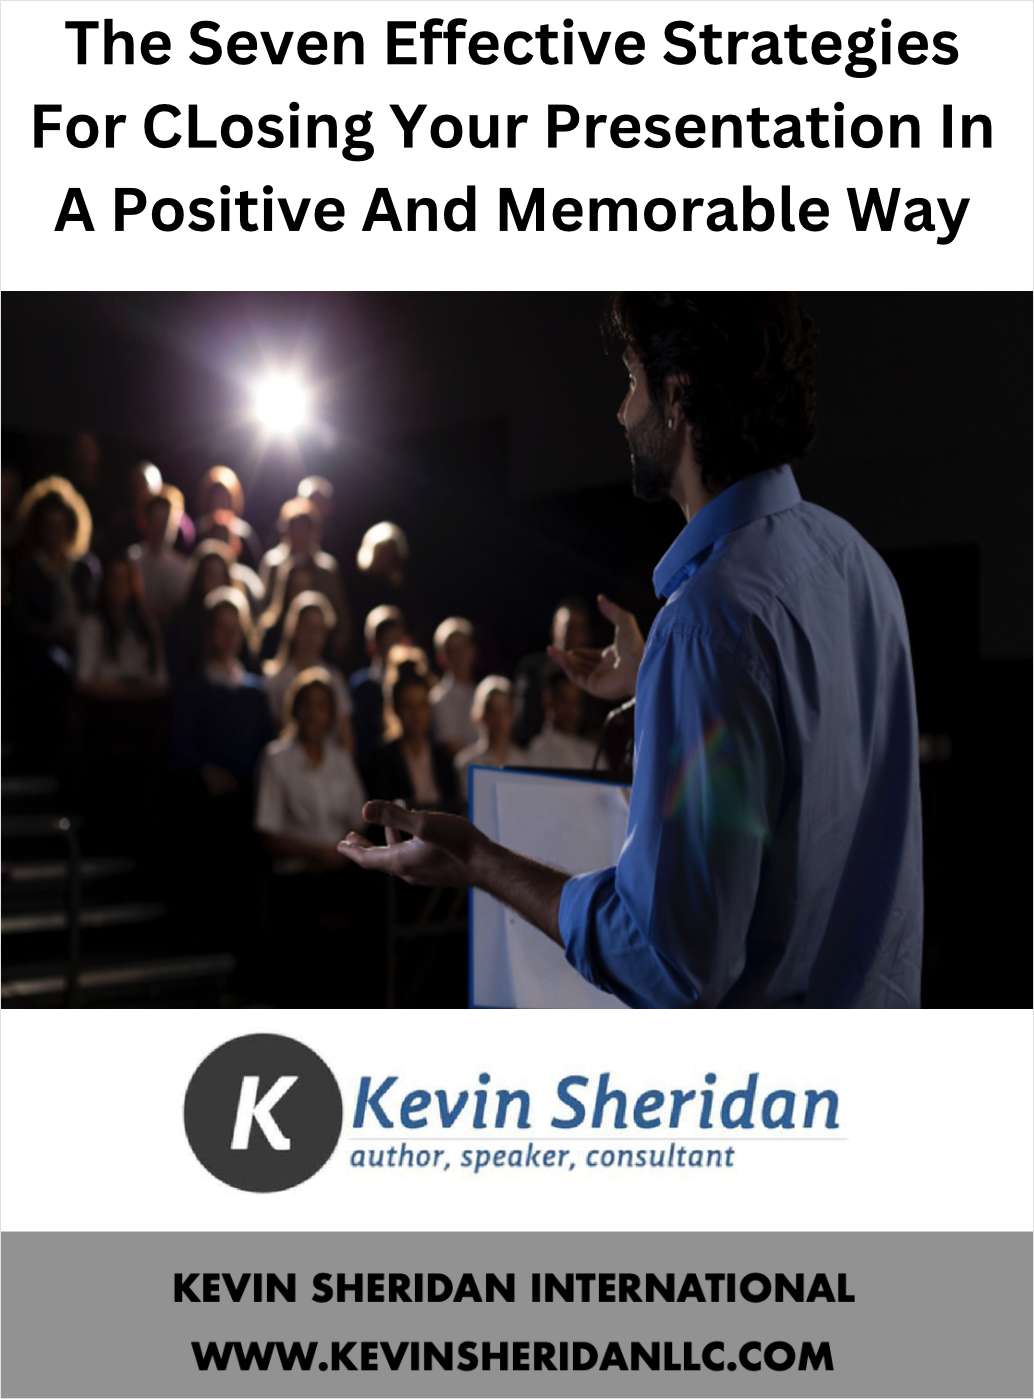 The Seven Most Effective Strategies For Closing Your Presentation In A Positive And Memorable Way